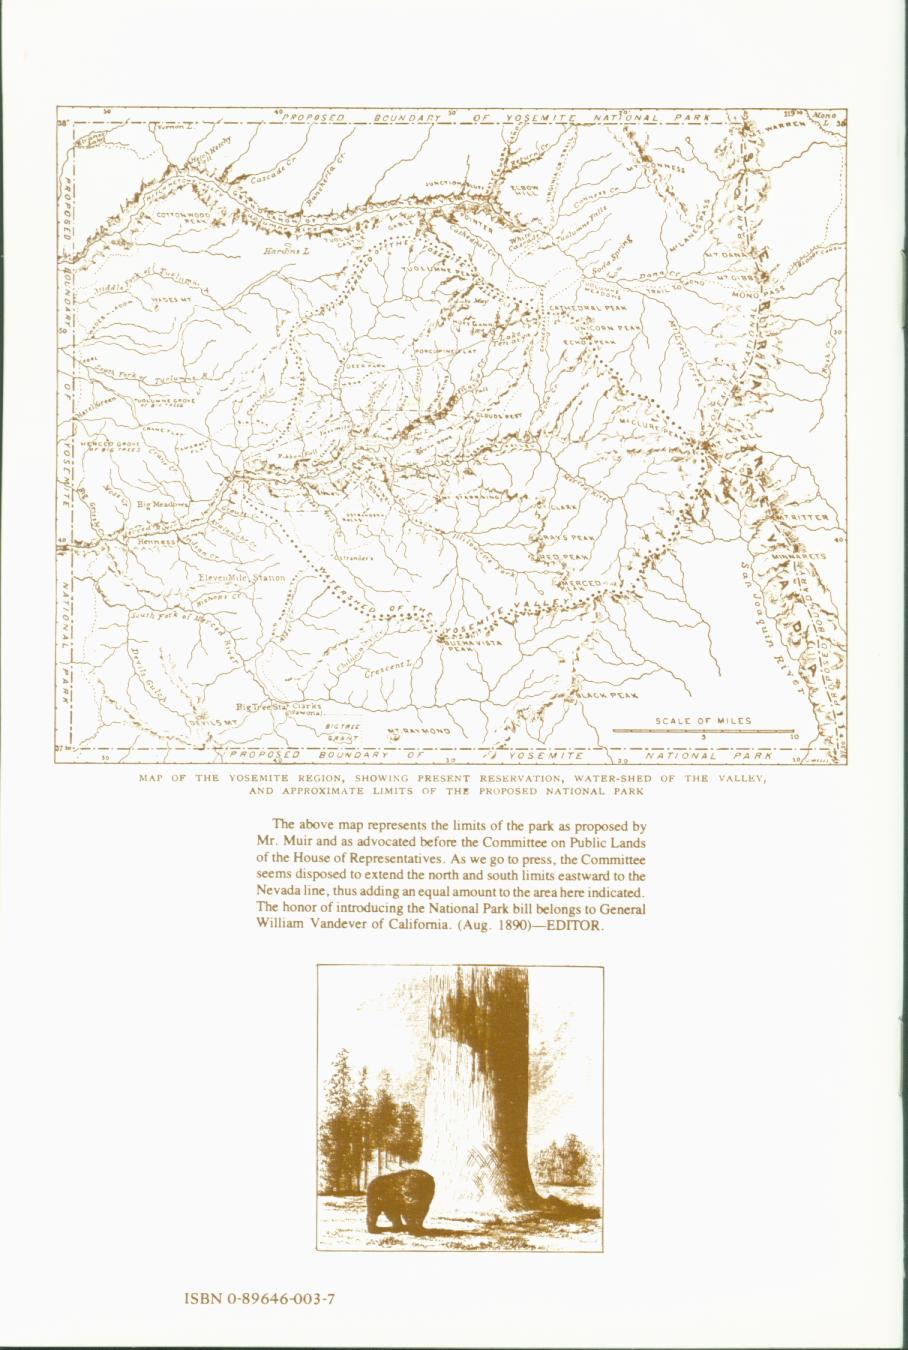 THE PROPOSED YOSEMITE NATIONAL PARK--treasures & features, 1890. vist0003a